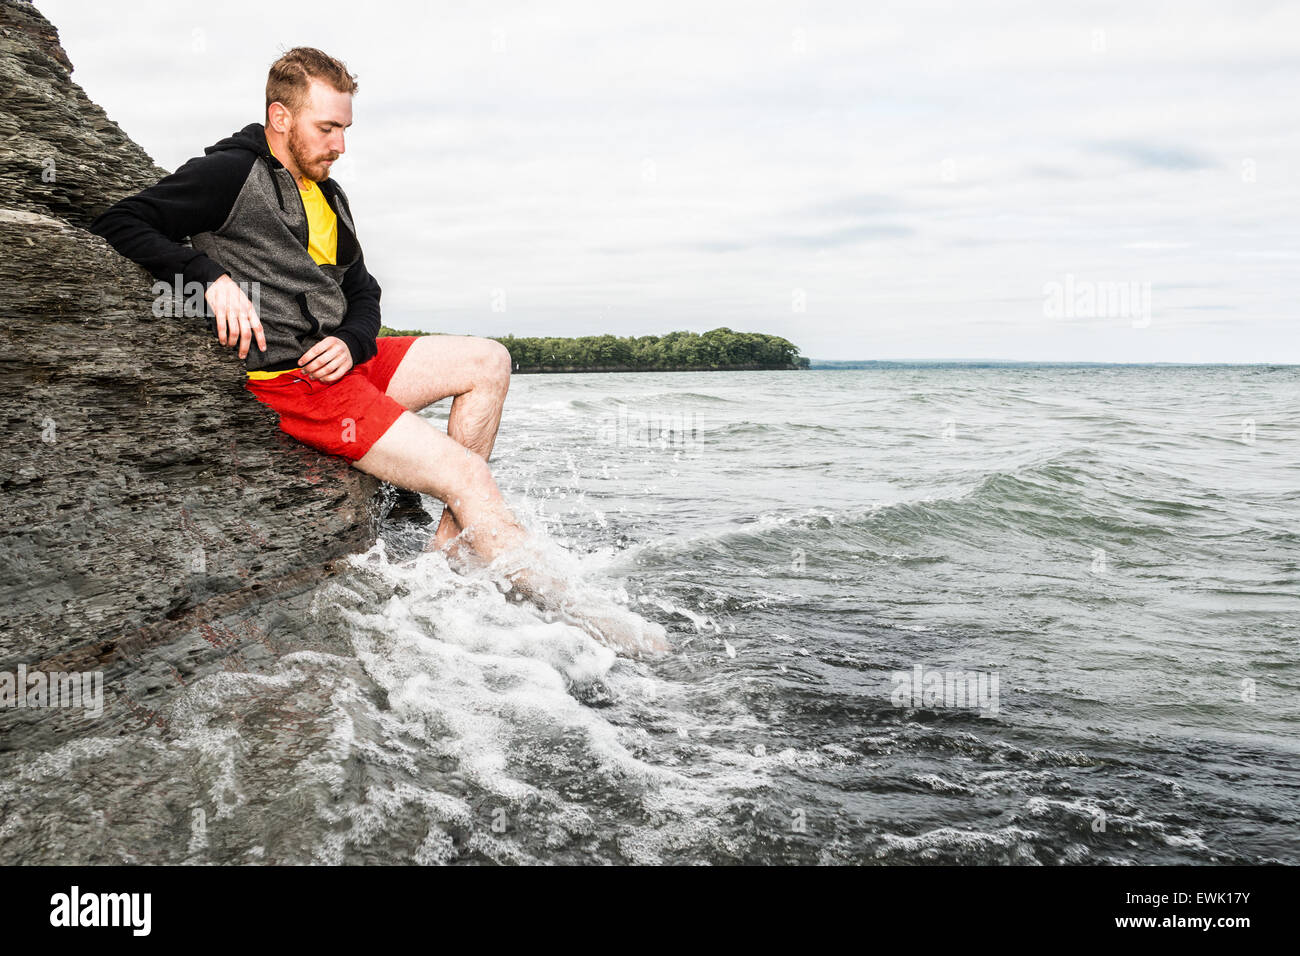 Young man sitting on a rocky cliff at a beach. Stock Photo